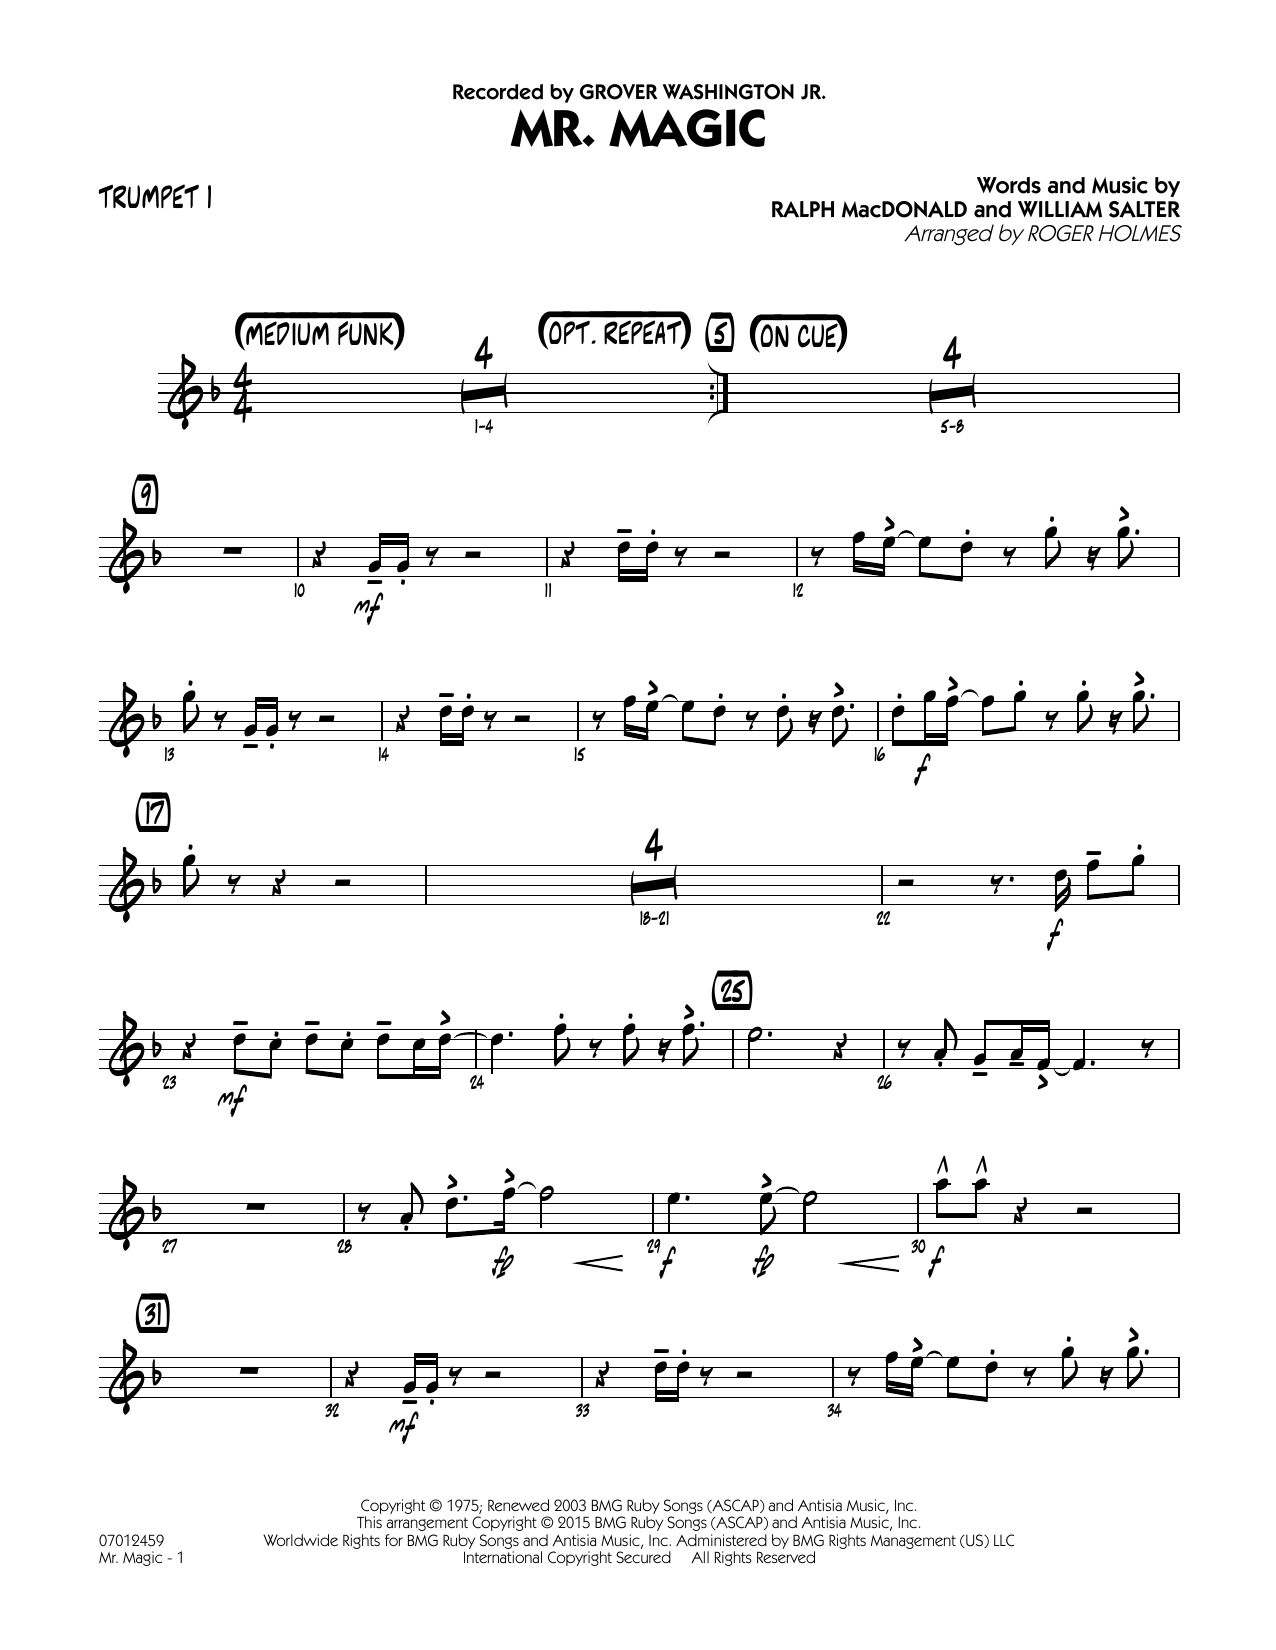 Roger Holmes Mister Magic (Mr. Magic) - Trumpet 1 sheet music notes and chords. Download Printable PDF.